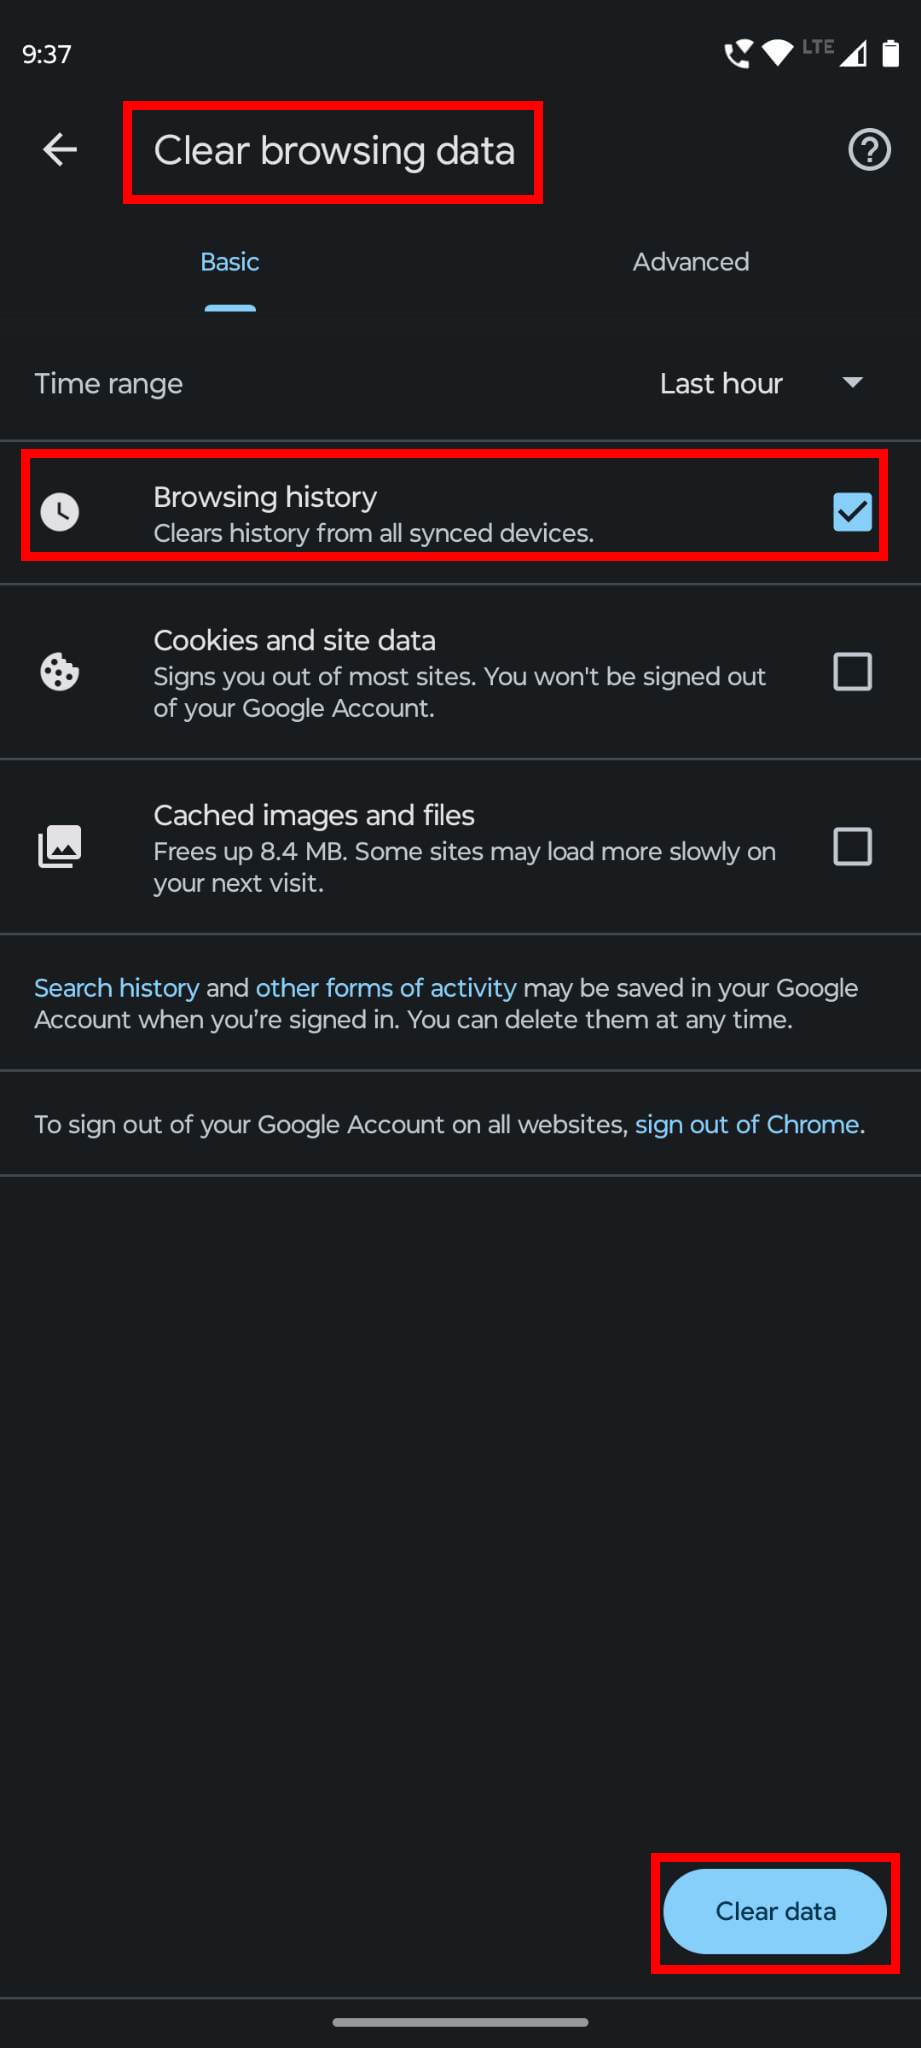 How to clear browsing history on Chrome